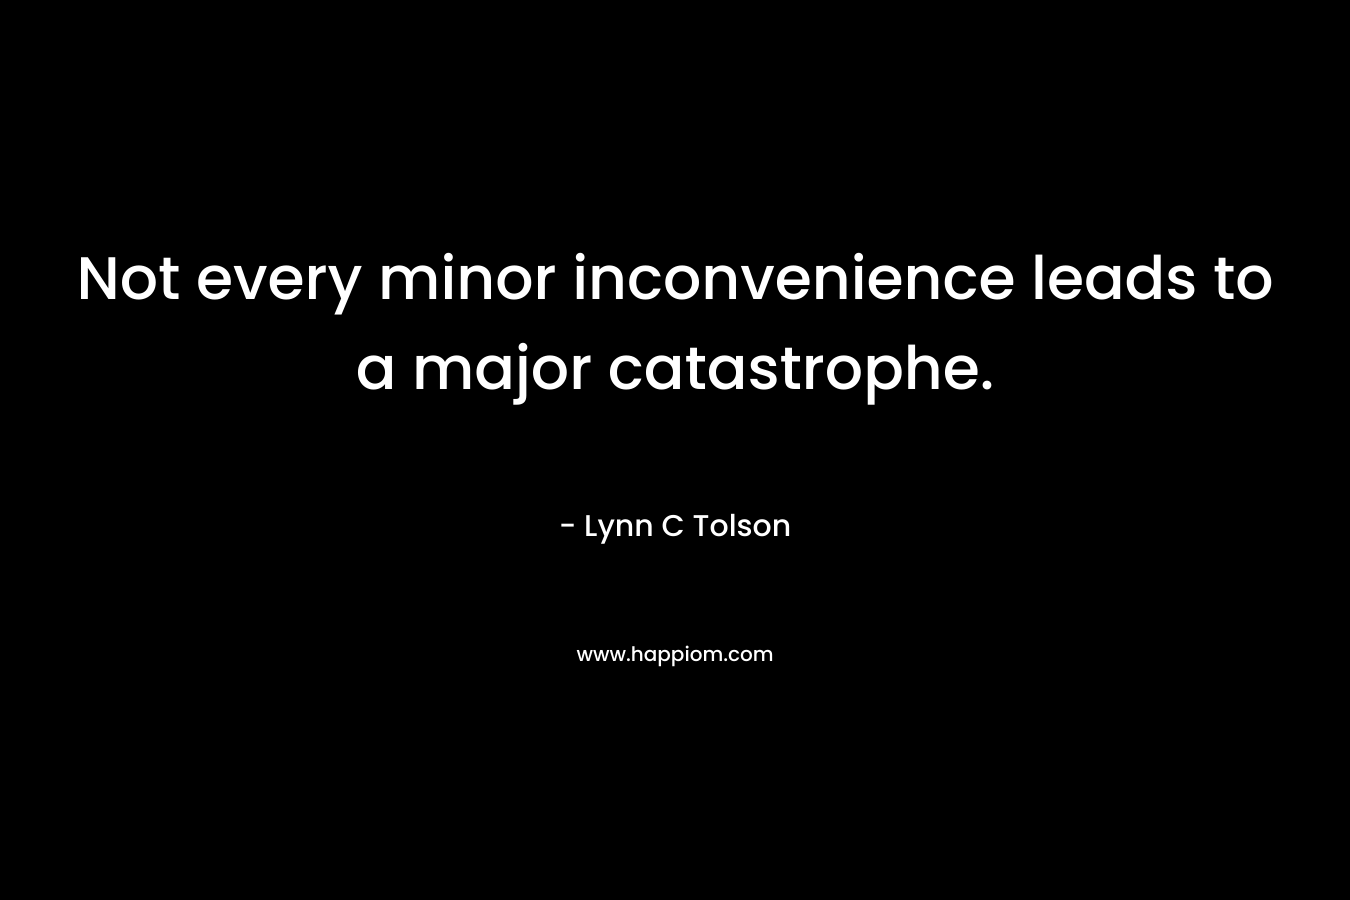 Not every minor inconvenience leads to a major catastrophe.